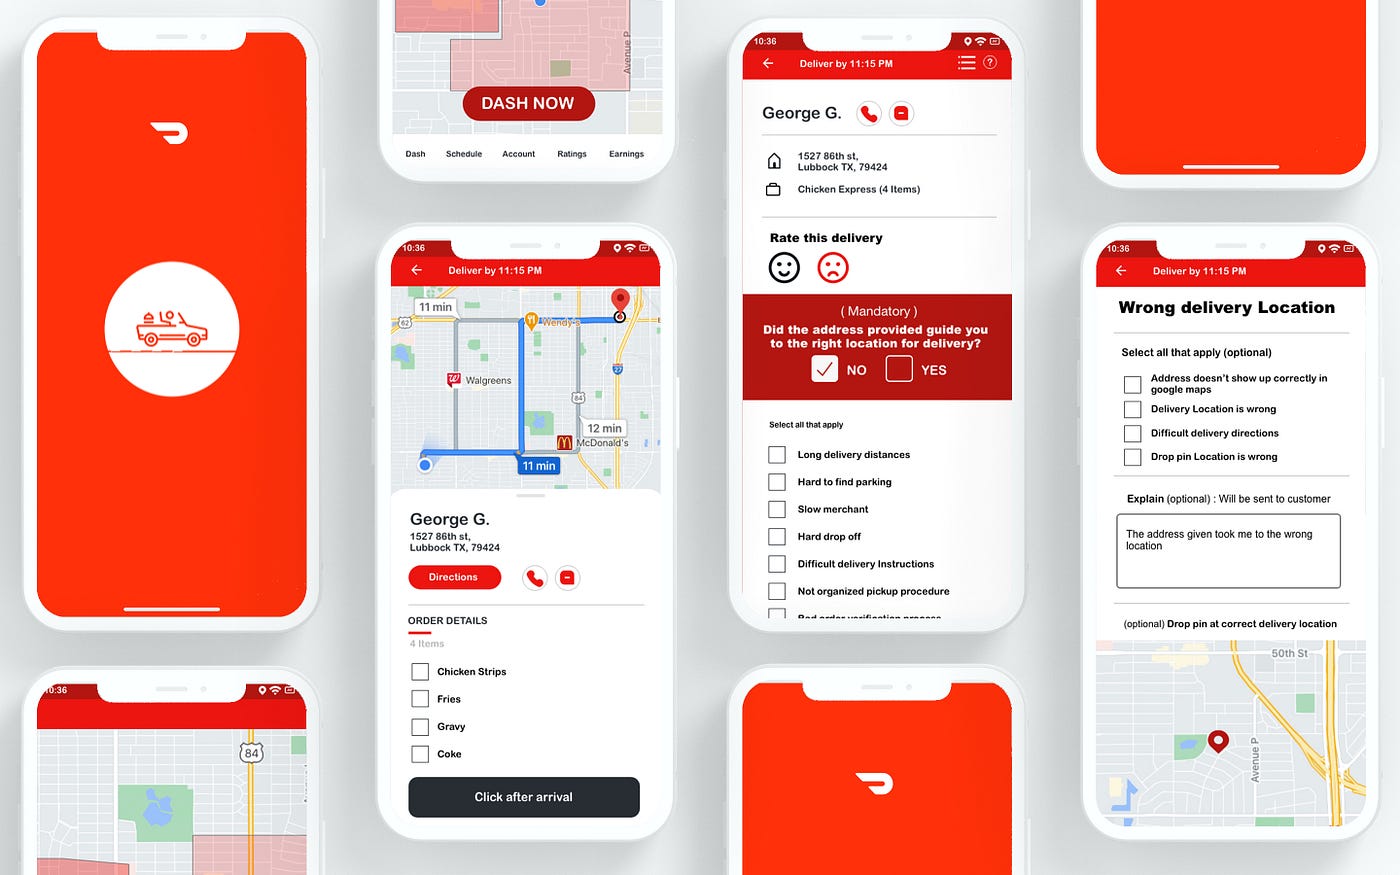 Track your performance to find ways on how to get orders on DoorDash. Look for areas to improve, track sales, and keep an eye out on regular dips